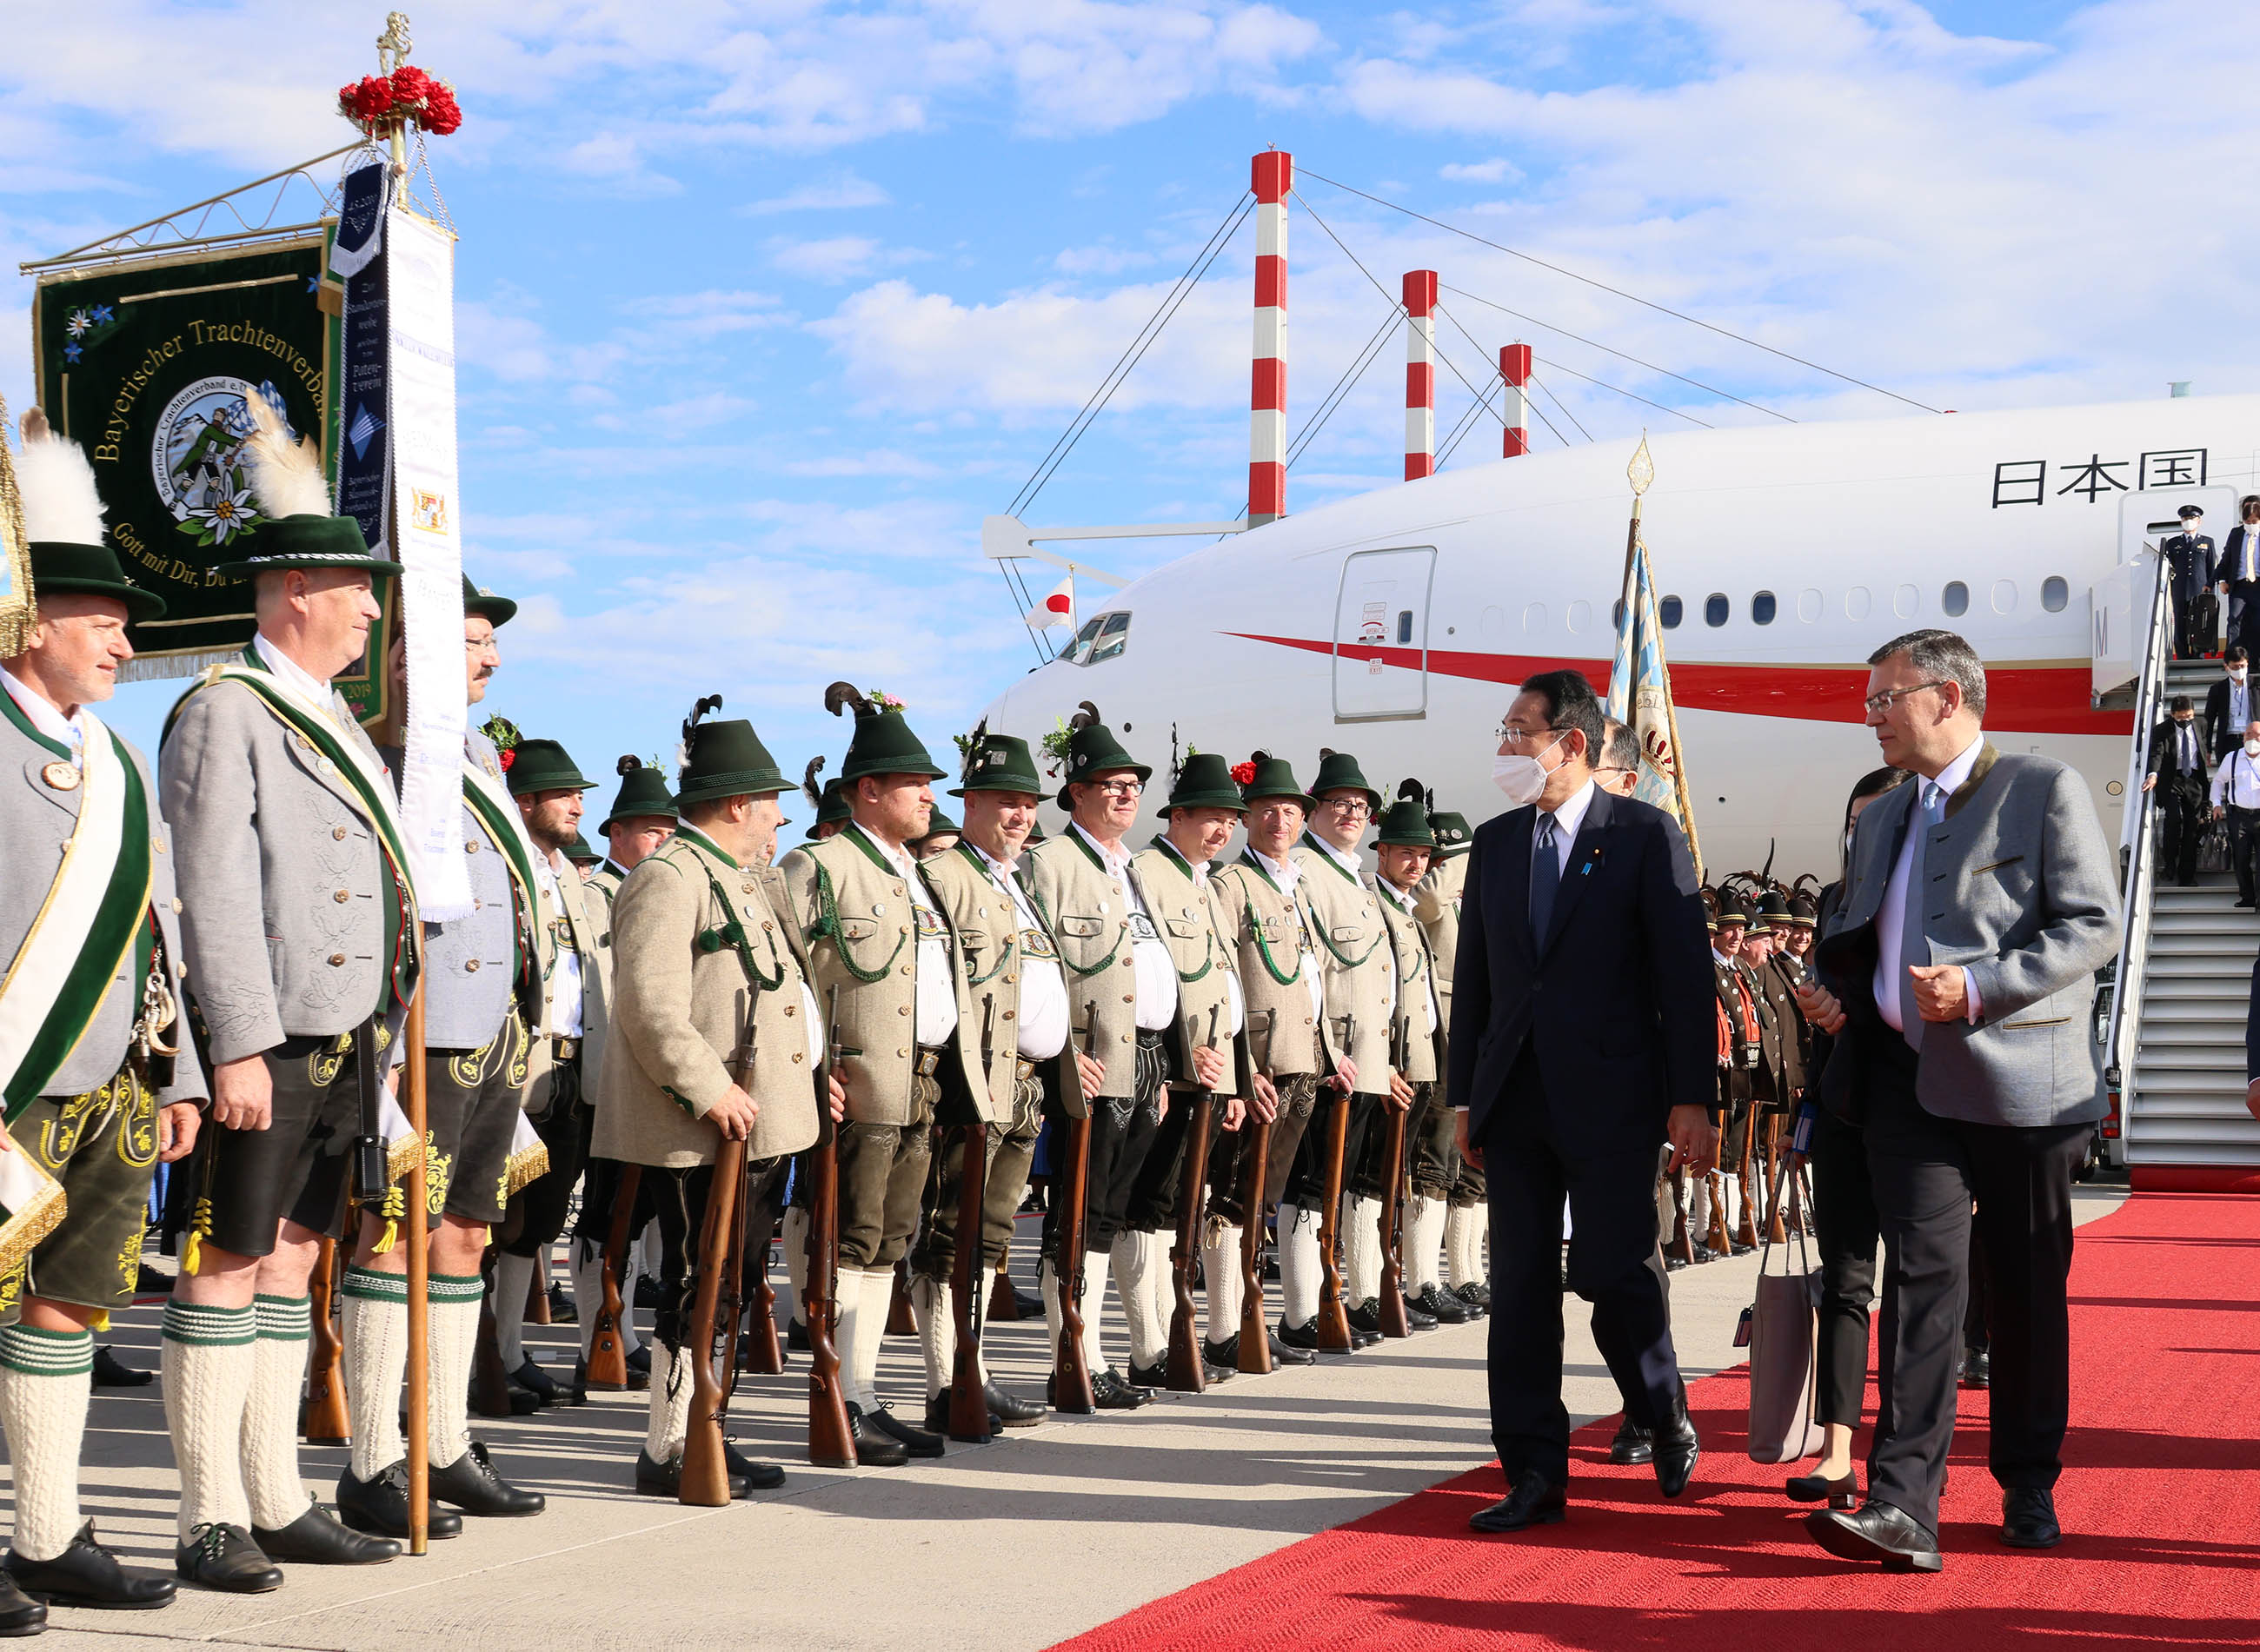 Photograph of the Prime Minister arriving in Germany (2)